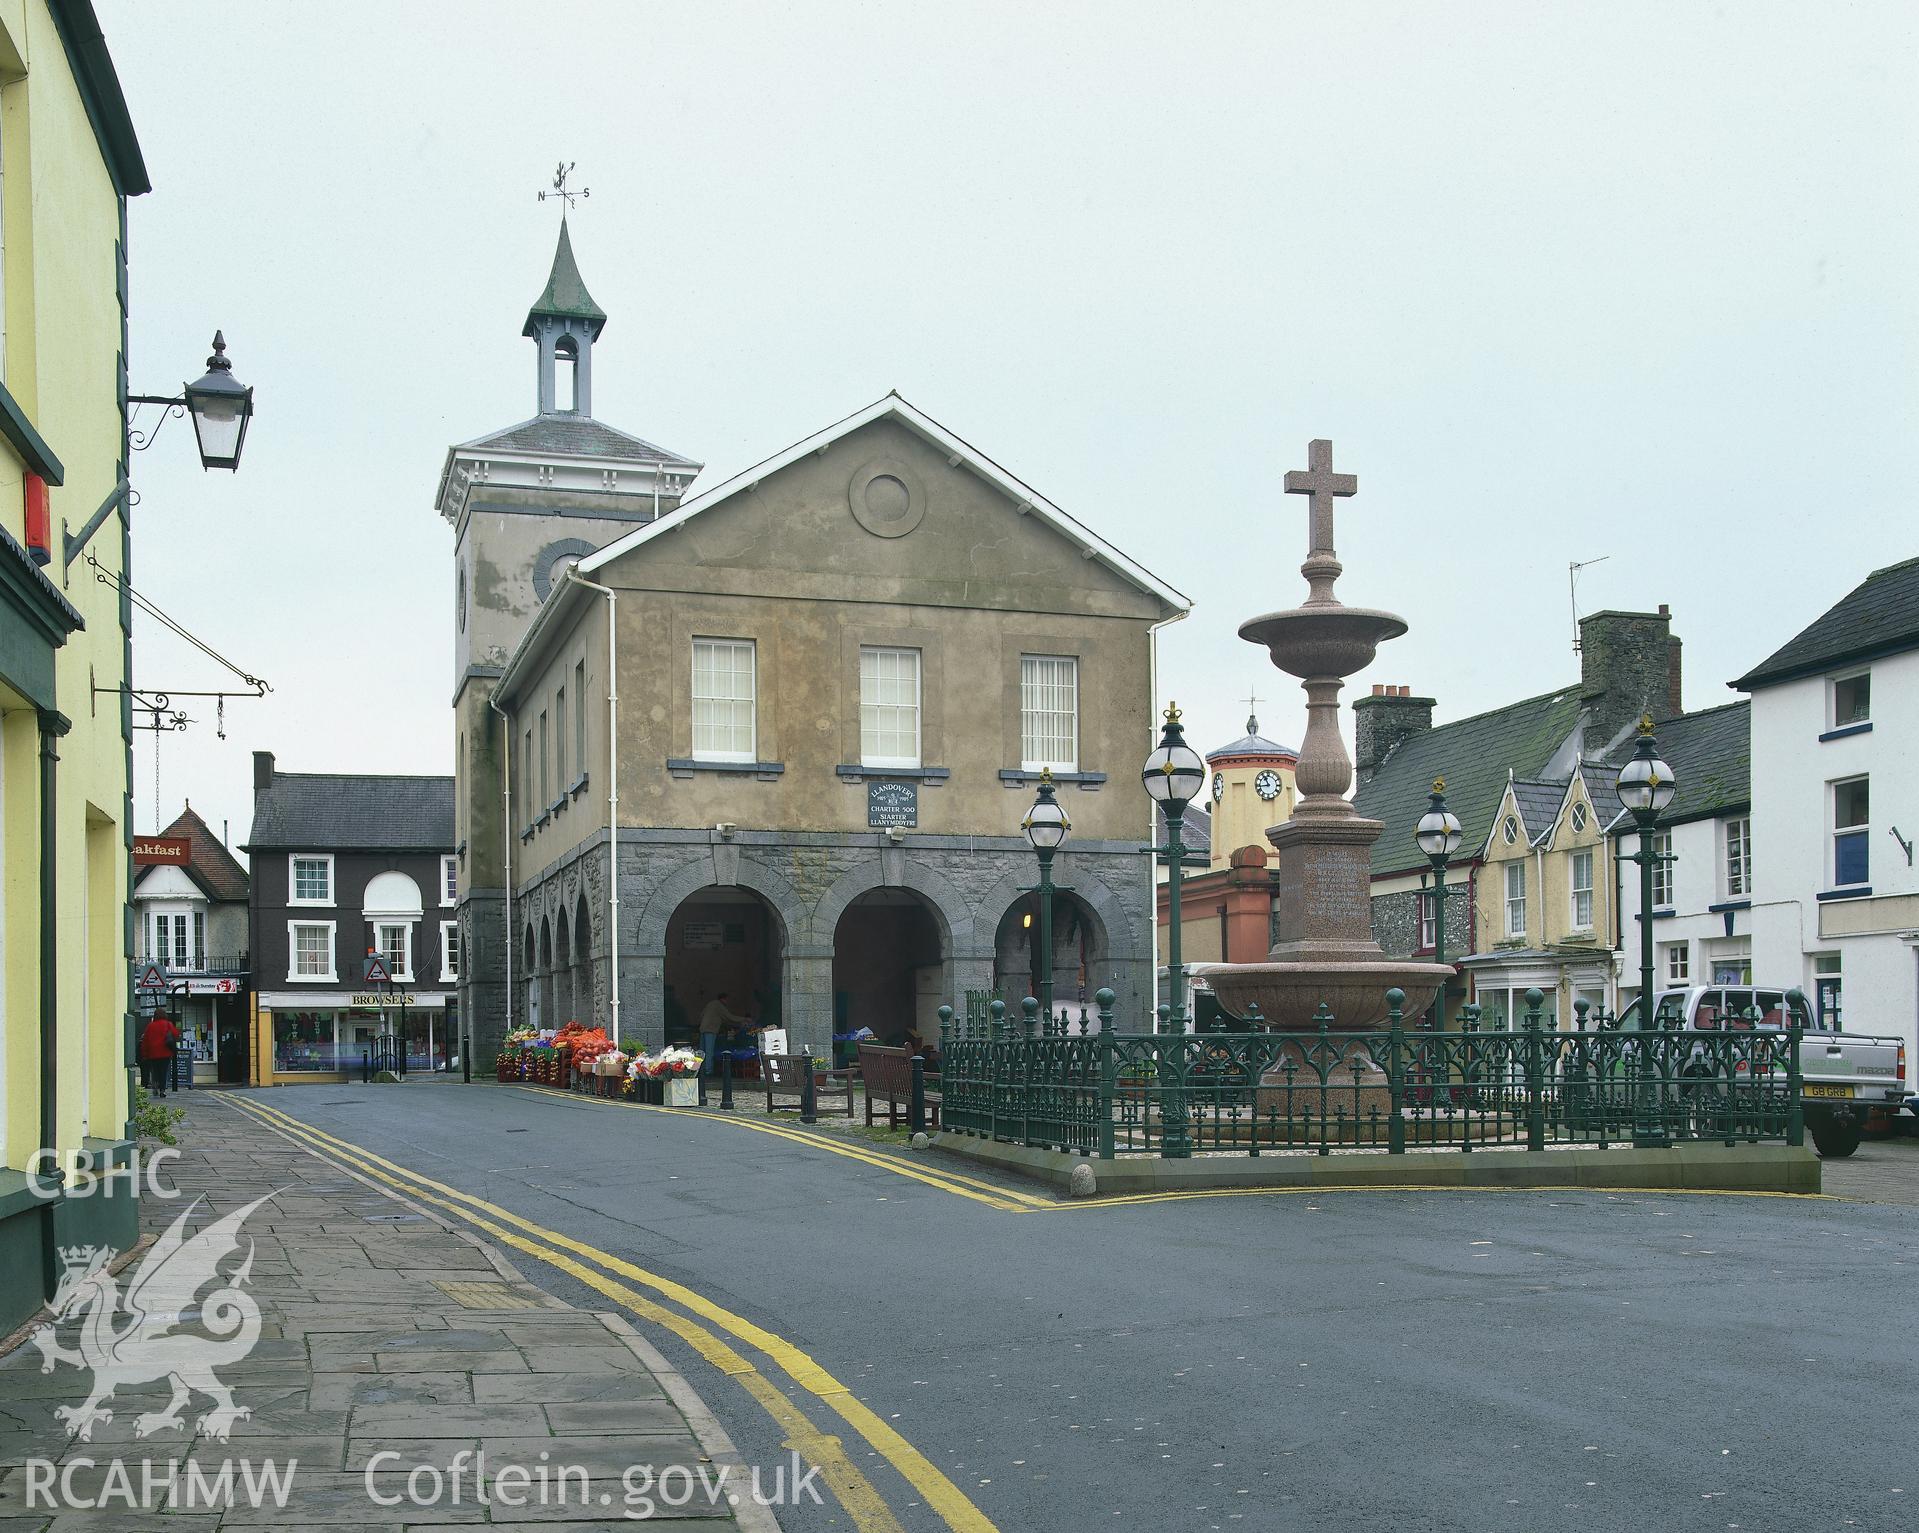 RCAHMW colour transparency showing exterior view of Town Hall, Llandovery